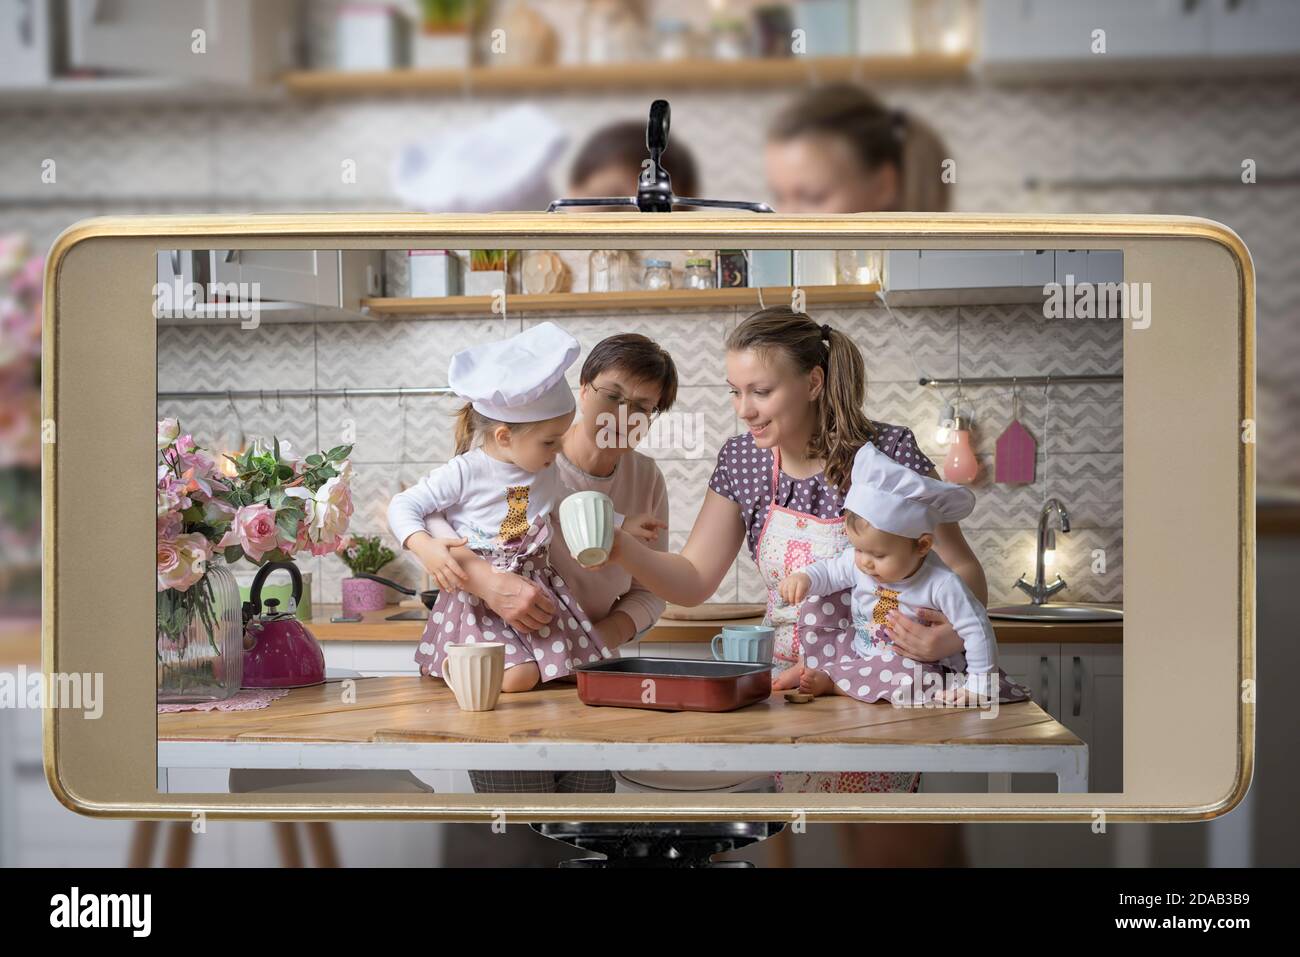 Young female blogger and vlogger online influencer mom with grandmother and two daughters, live streaming a cooking with children show on social media Stock Photo